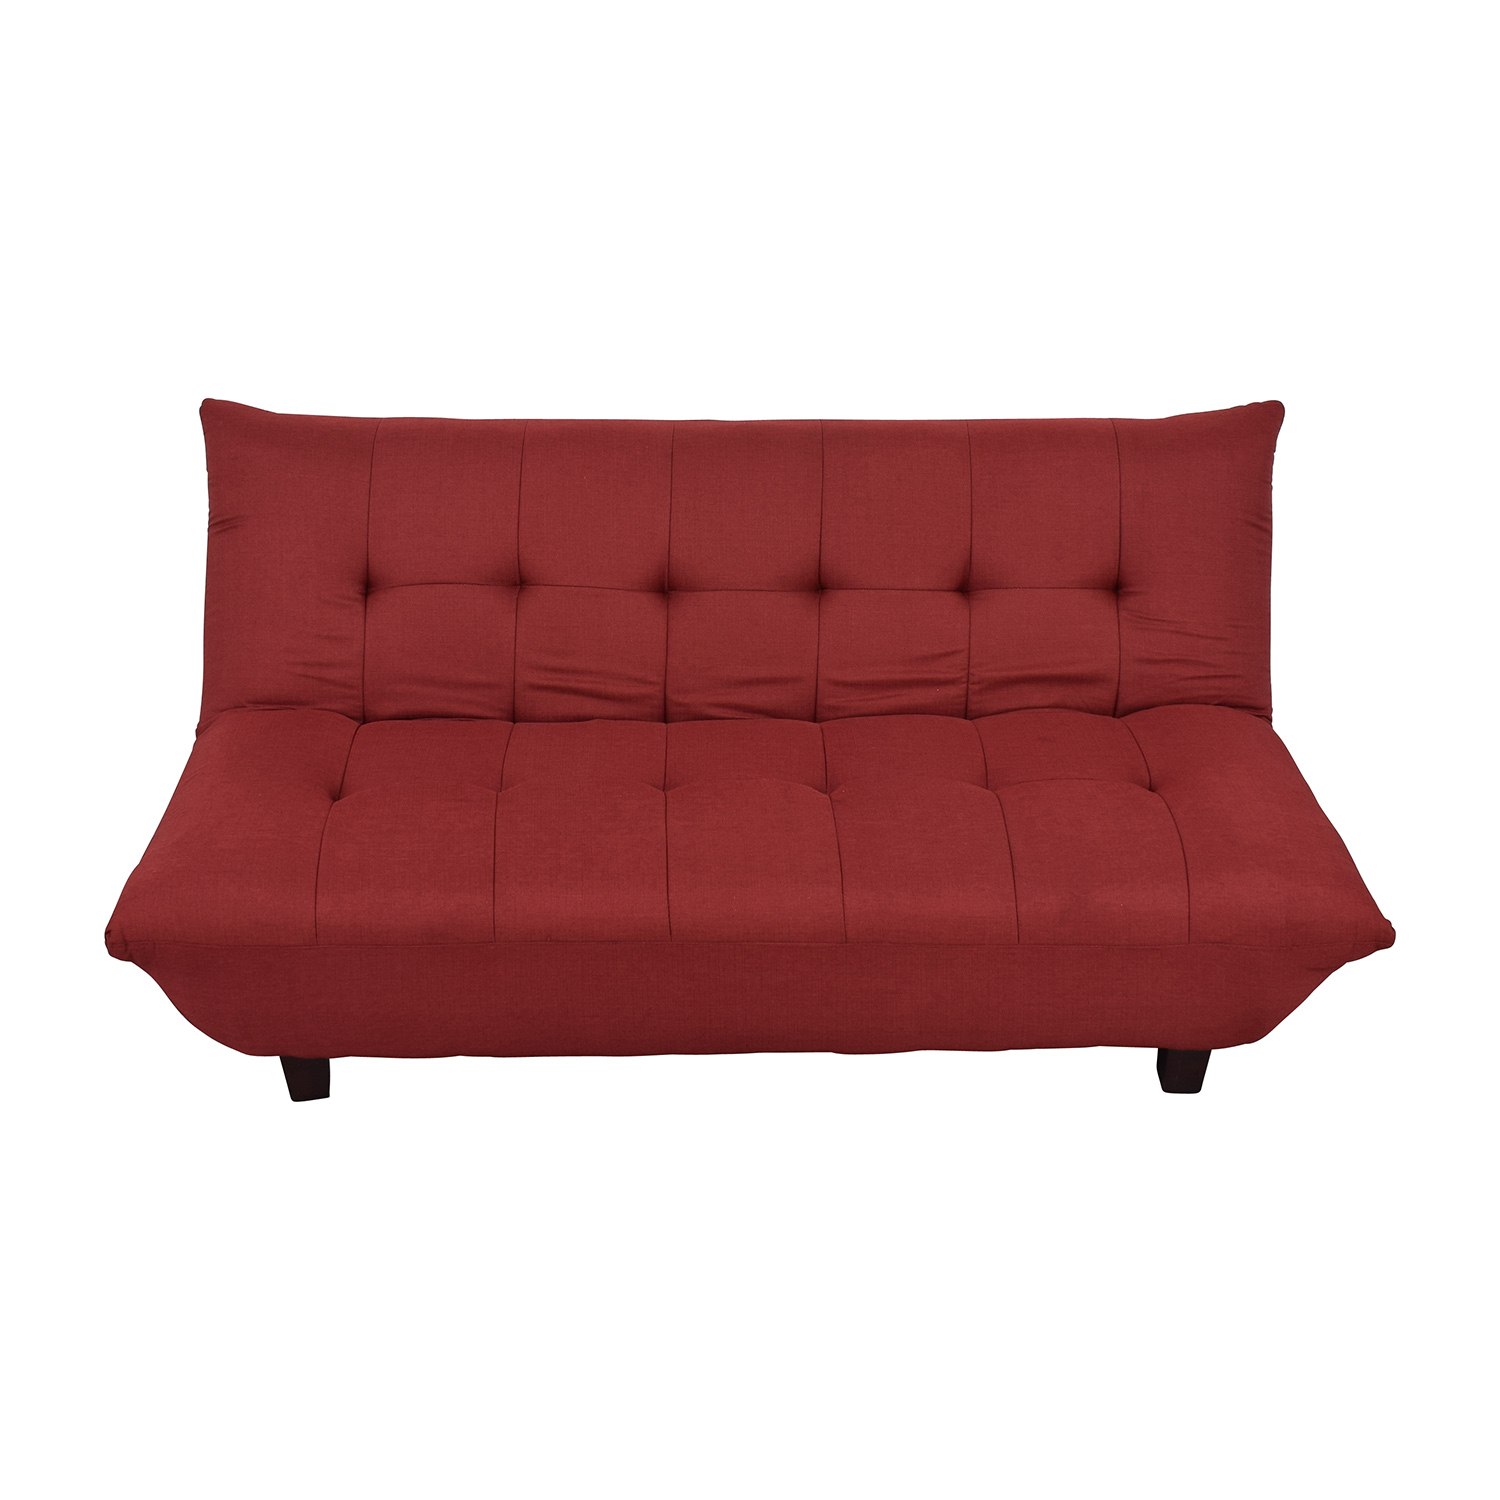 Red Tufted Futon Sofa Bed dimensions